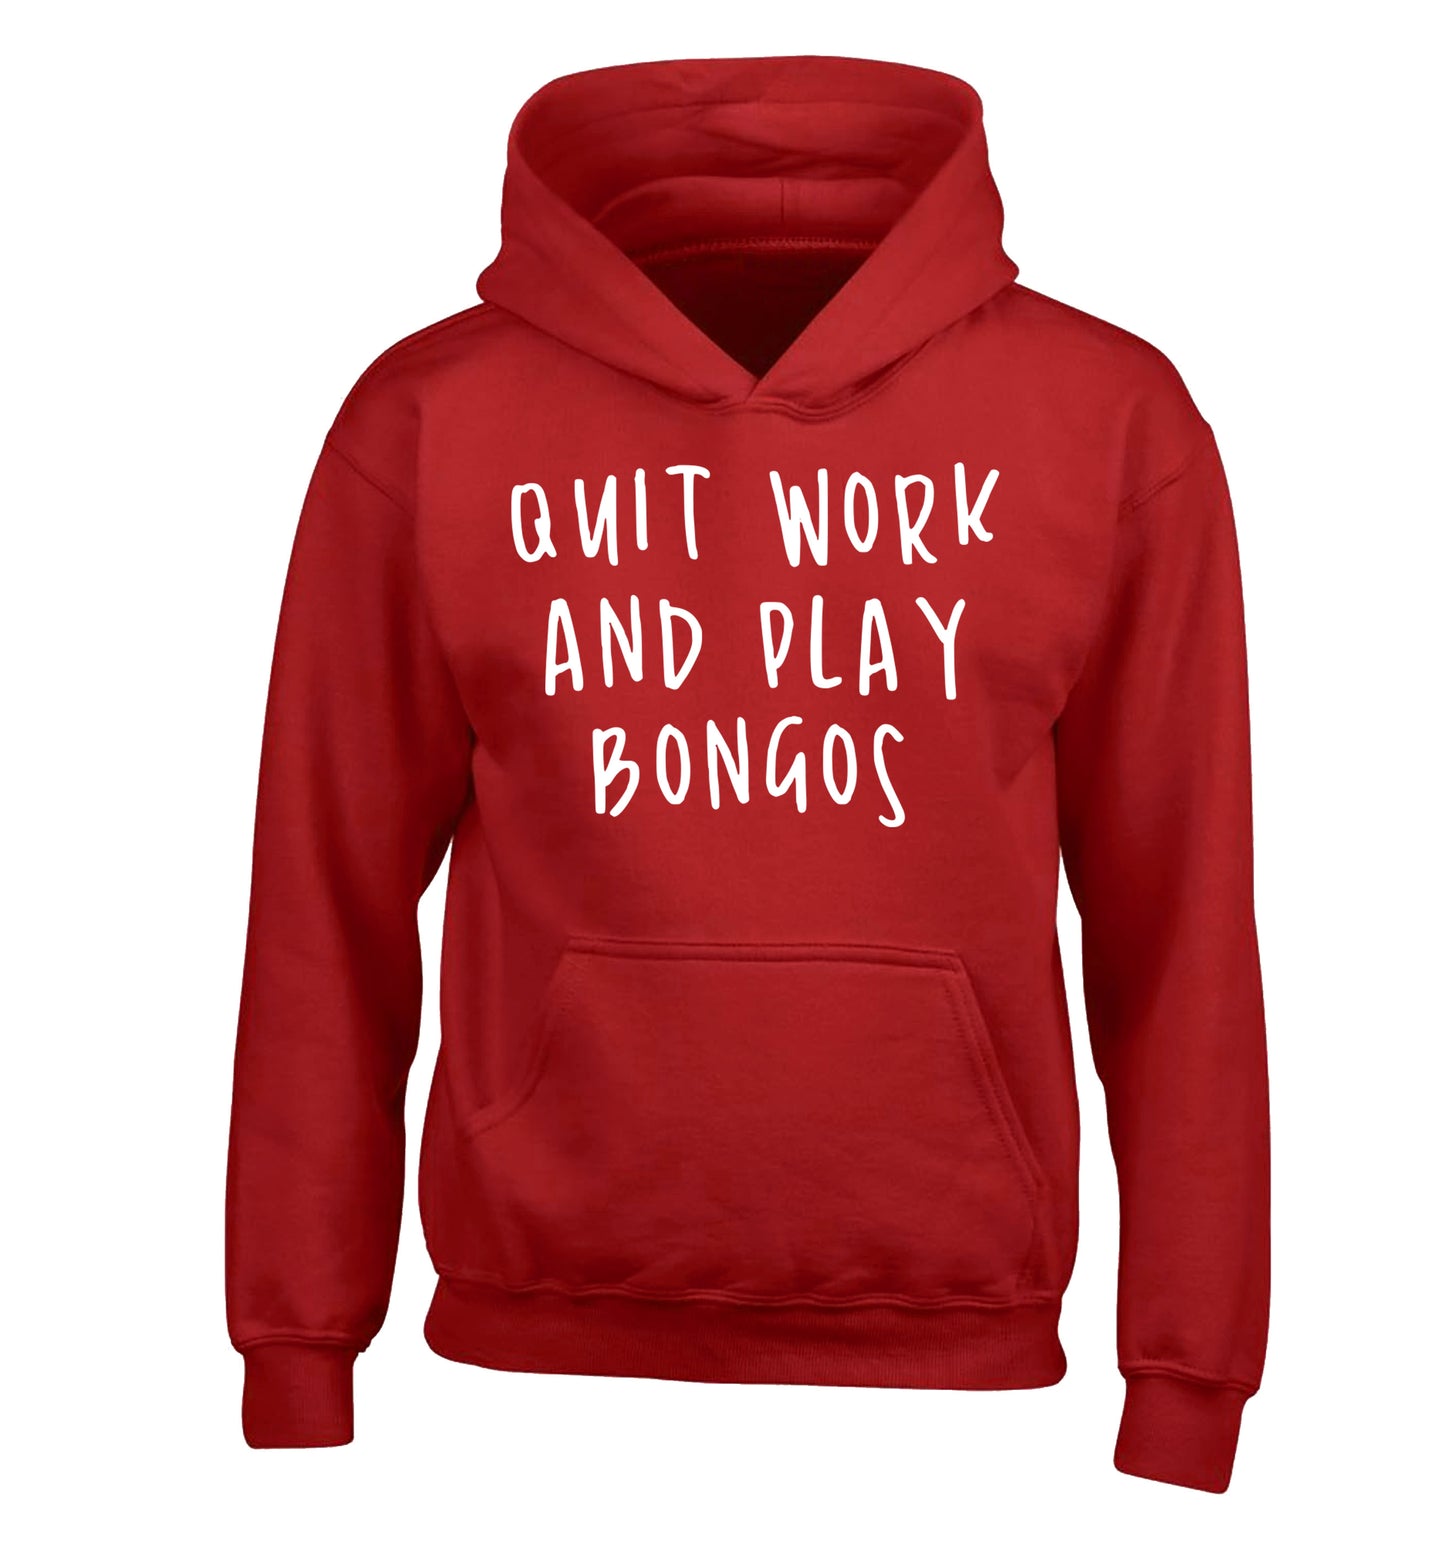 Quit work and play bongos children's red hoodie 12-14 Years